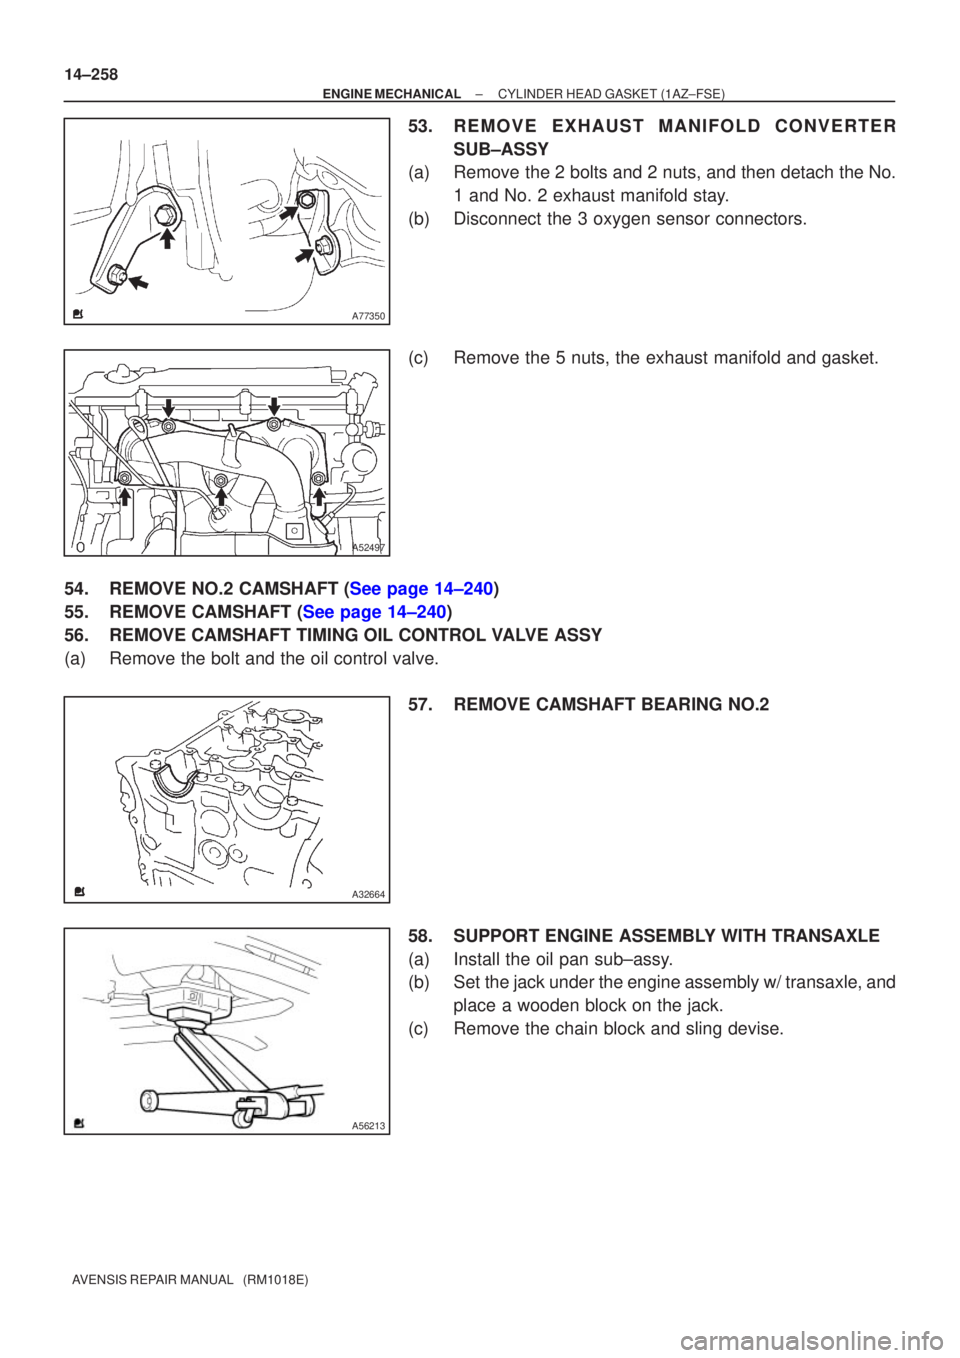 TOYOTA AVENSIS 2005  Service Repair Manual A77350
A52497
A32664
A56213
14±258
±
ENGINE MECHANICAL CYLINDER HEAD GASKET(1AZ±FSE)
AVENSIS REPAIR MANUAL   (RM1018E)
53.REMOVE EXHAUST MANIFOLD CONVERTER SUB±ASSY
(a)Remove the 2 bolts and 2 nut